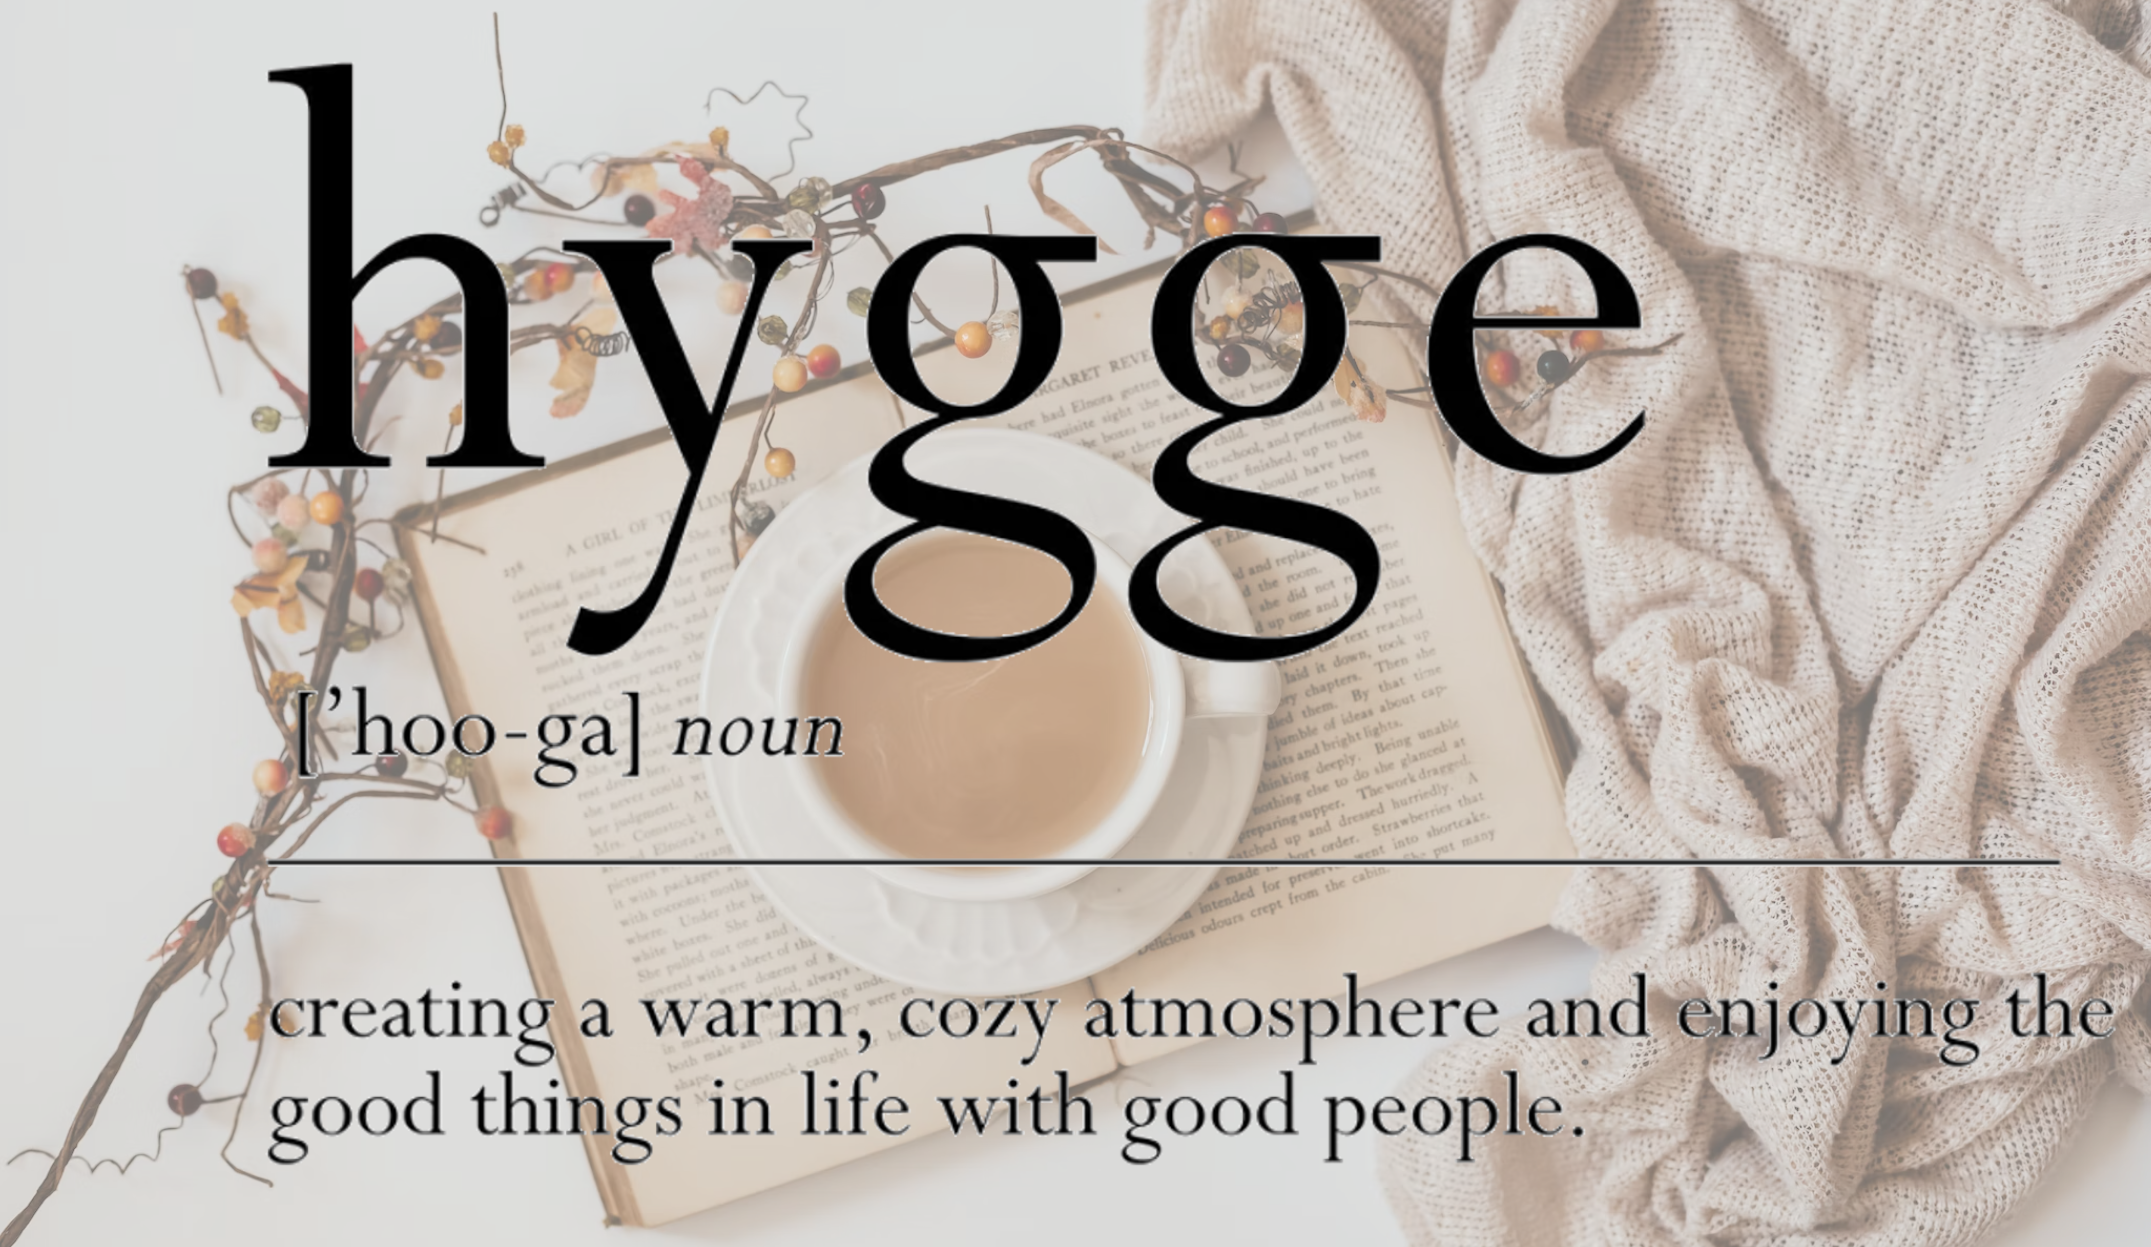 hygge definition and style